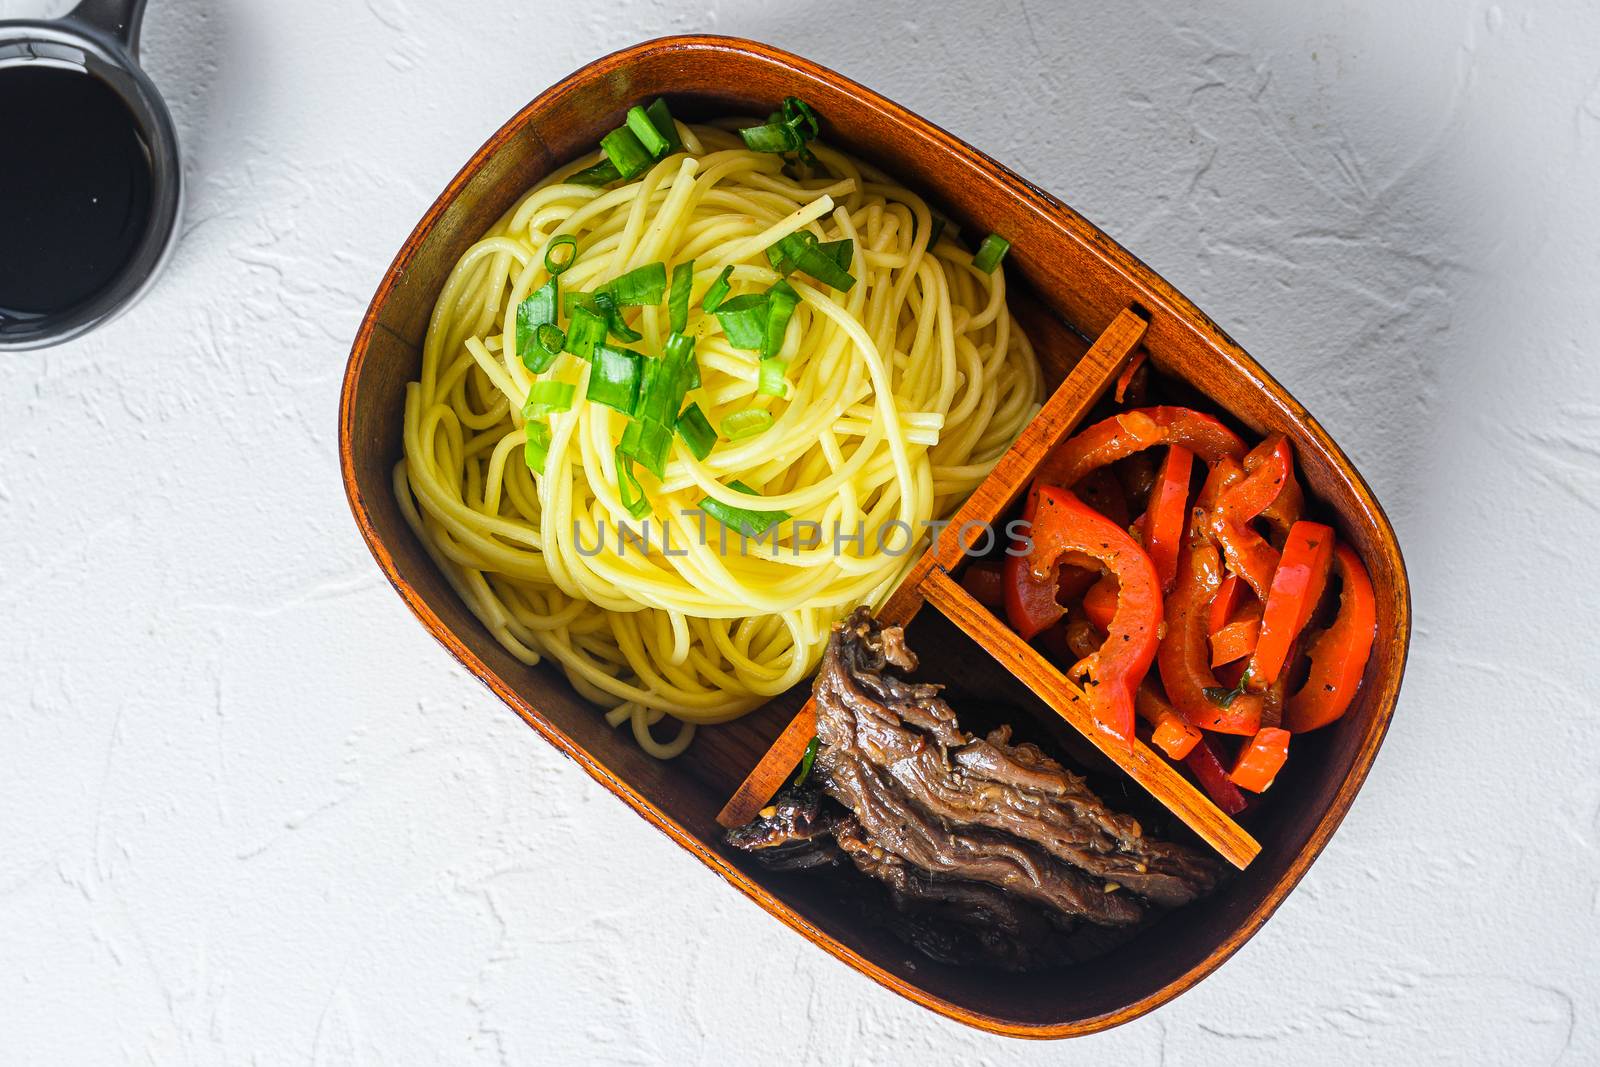 Bento beef noodles lunch box top view on white table close up by Ilianesolenyi